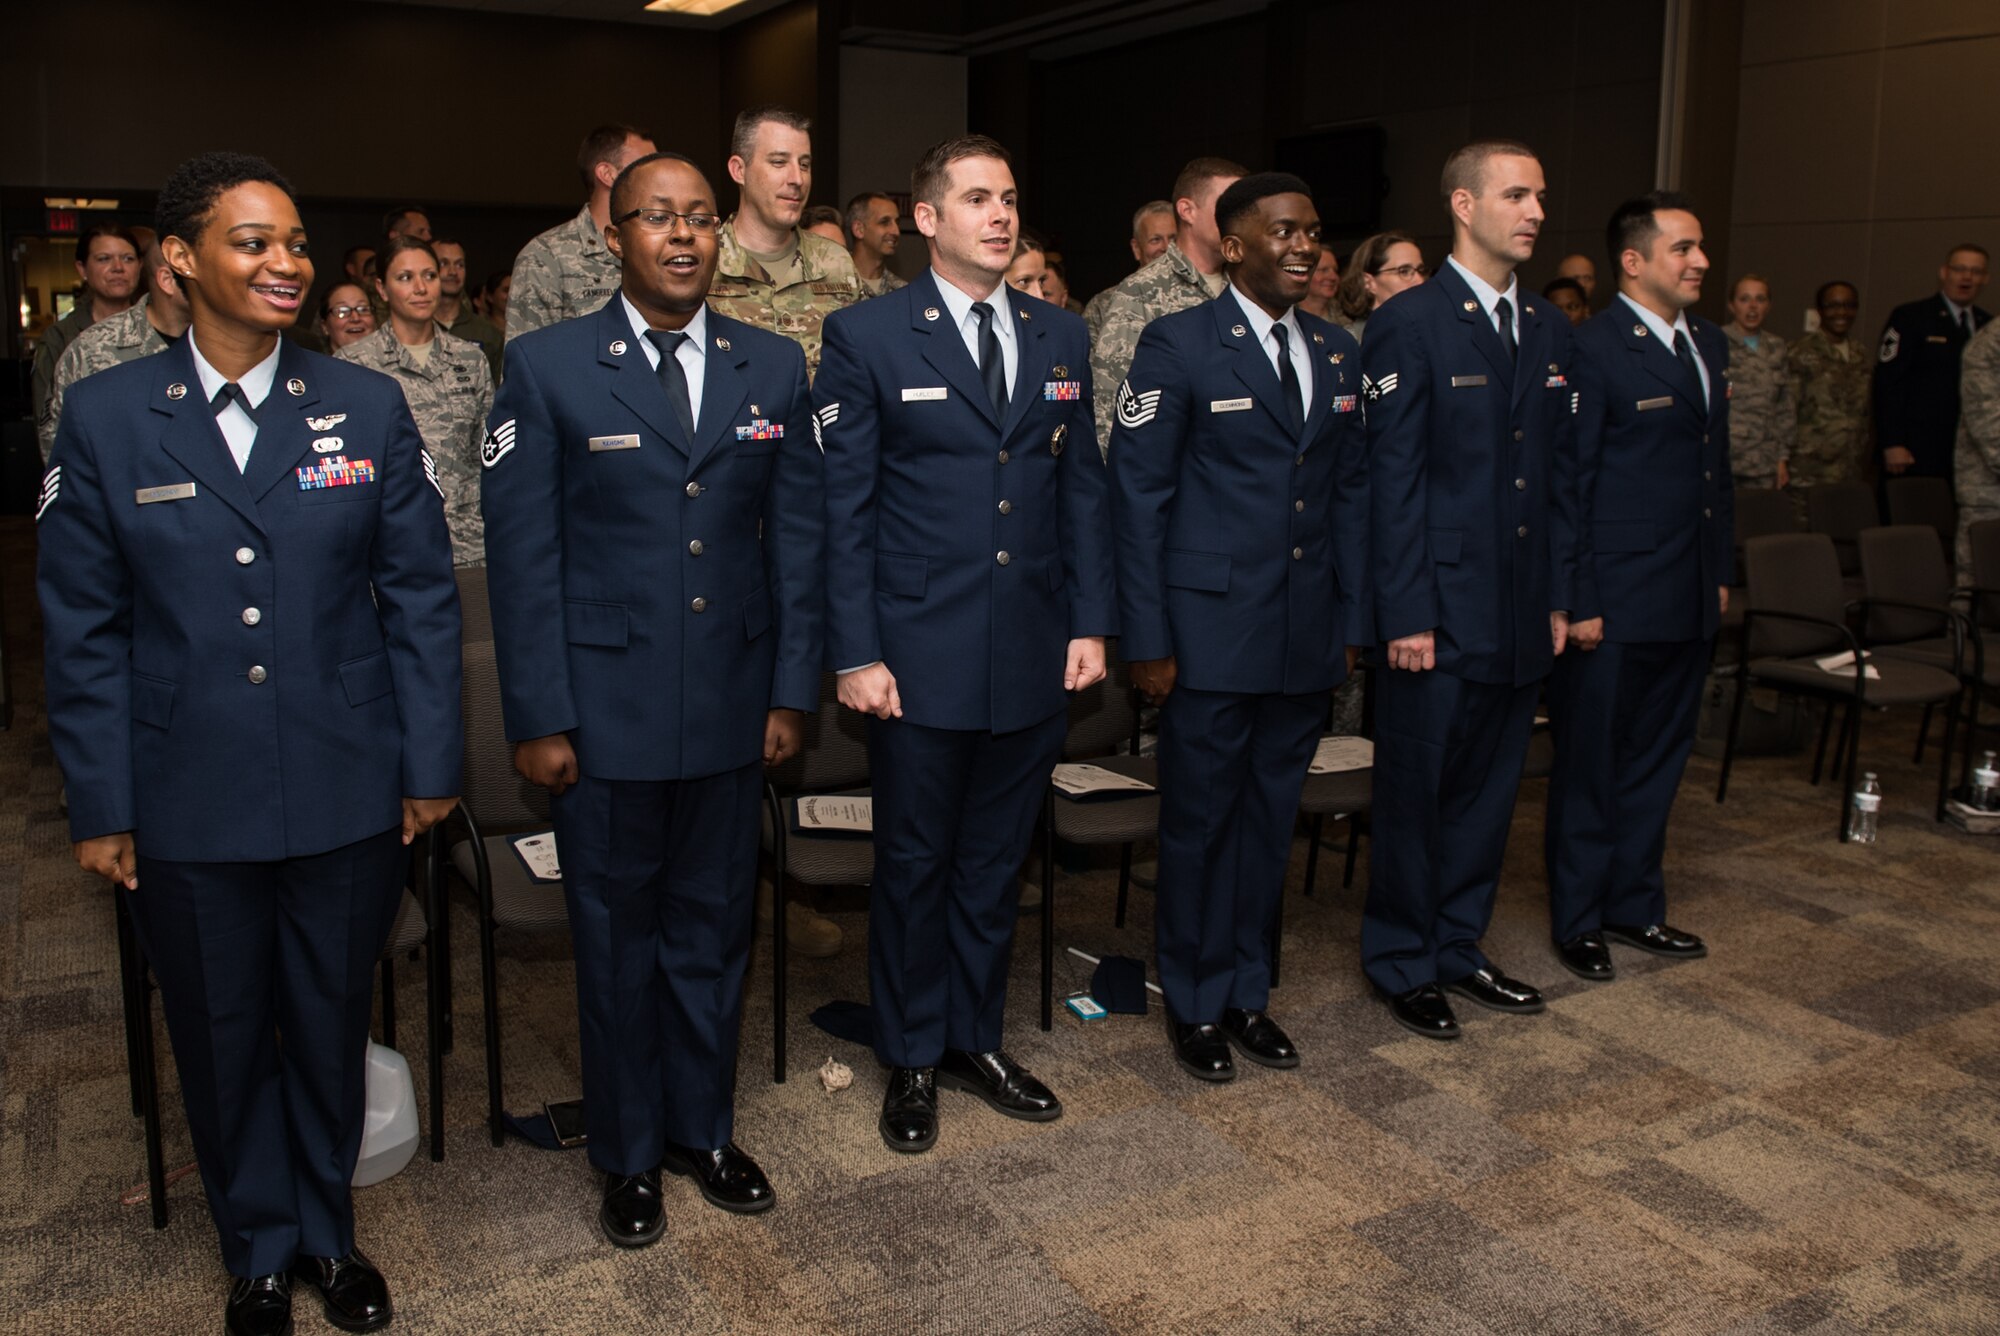 Airmen with the 932nd Airlift Wing graduate from the Community College of the Air Force,  June 2, 2019, Scott Air Force Base, Illinois. CCAF started in the early 1970s as a way to gain accreditation and recognition for training by the Air Force. (U.S. Air Force photo by Master Sgt. Christopher Parr)